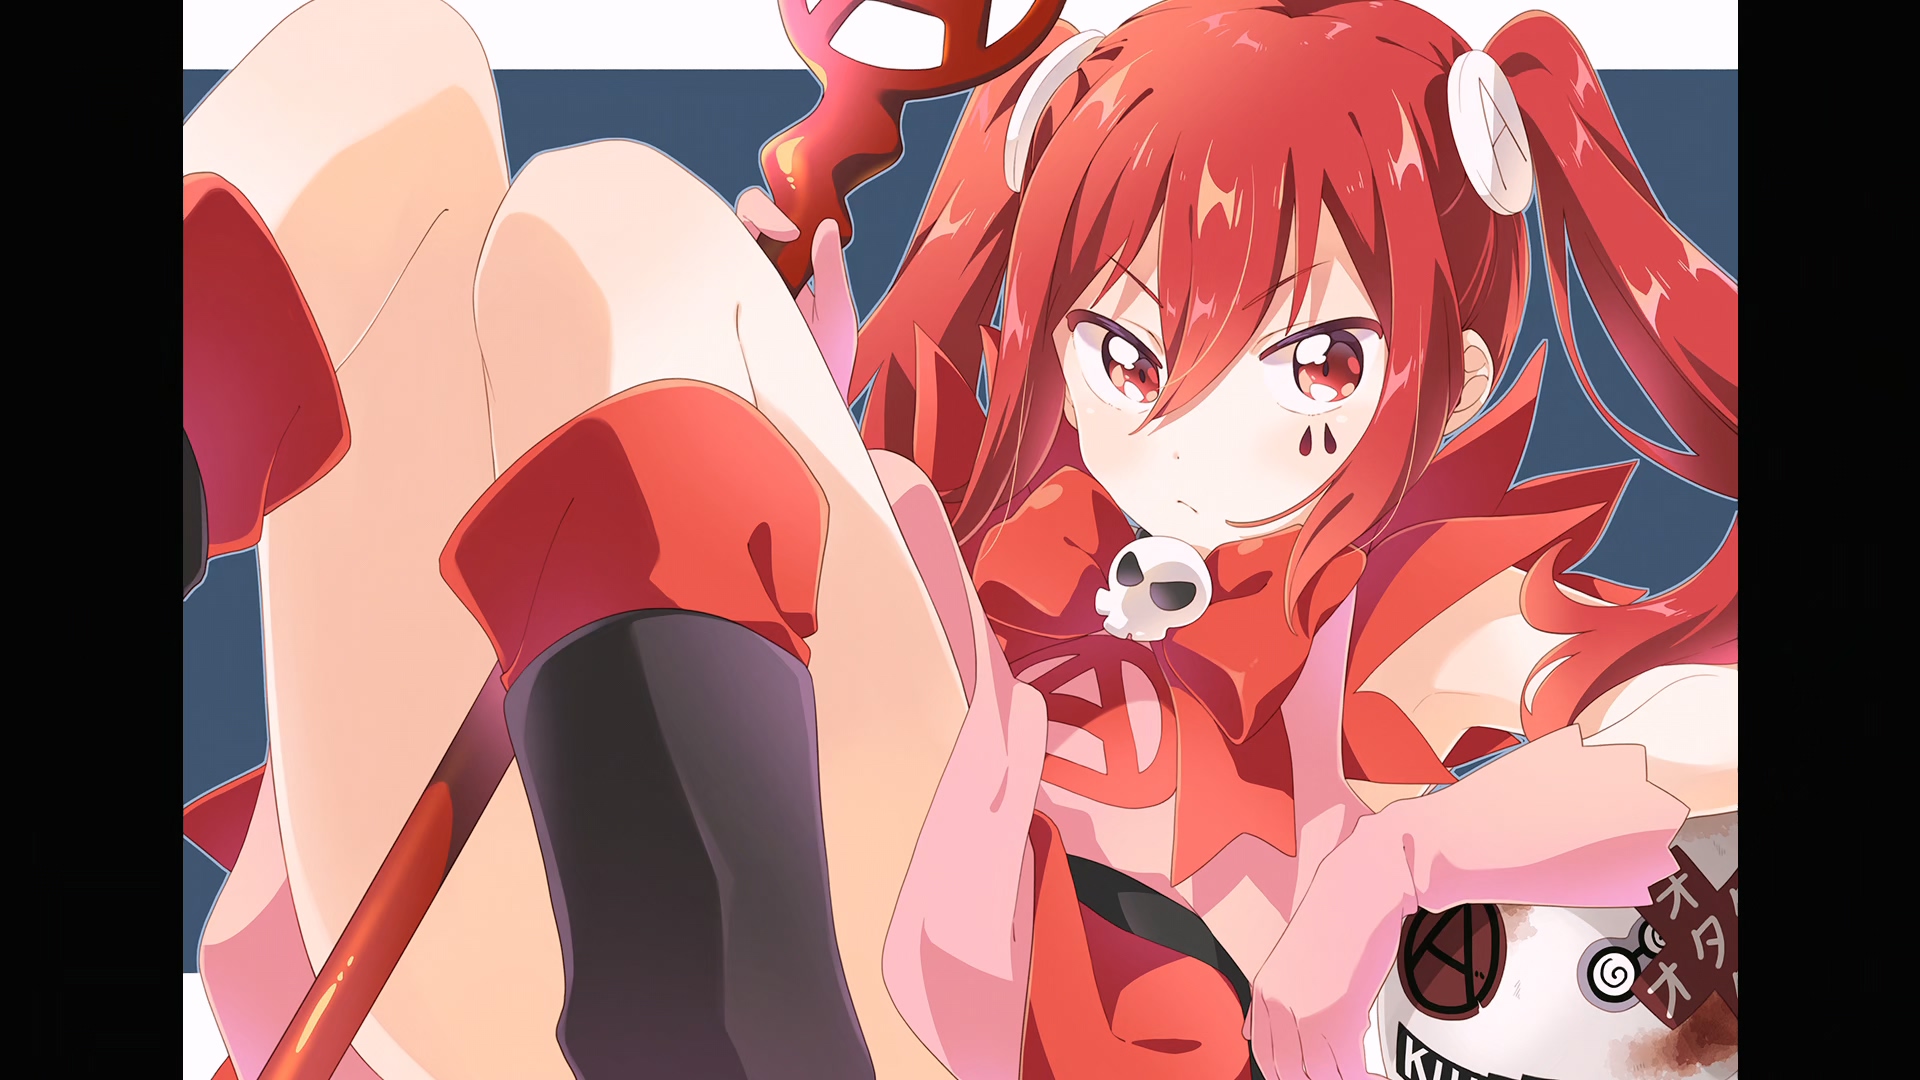 Mahou Shoujo Magical Destroyers Anime Girls Anime Twintails Gloves Redhead Red Eyes Looking At Viewe 1920x1080